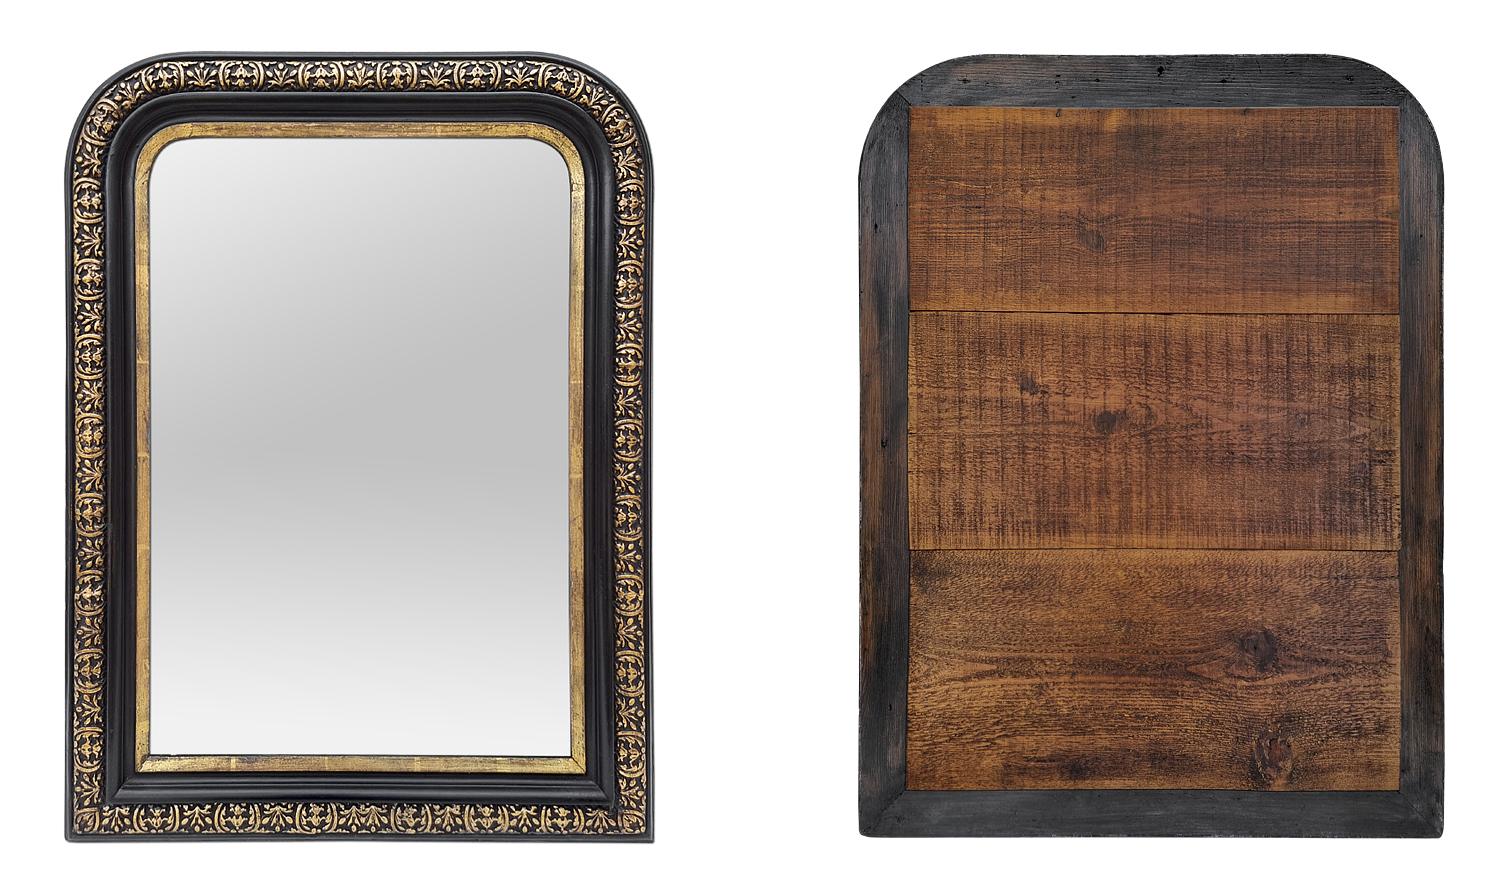 Late 19th Century Antique French Mirror, Giltwood & Black Colors, circa 1870